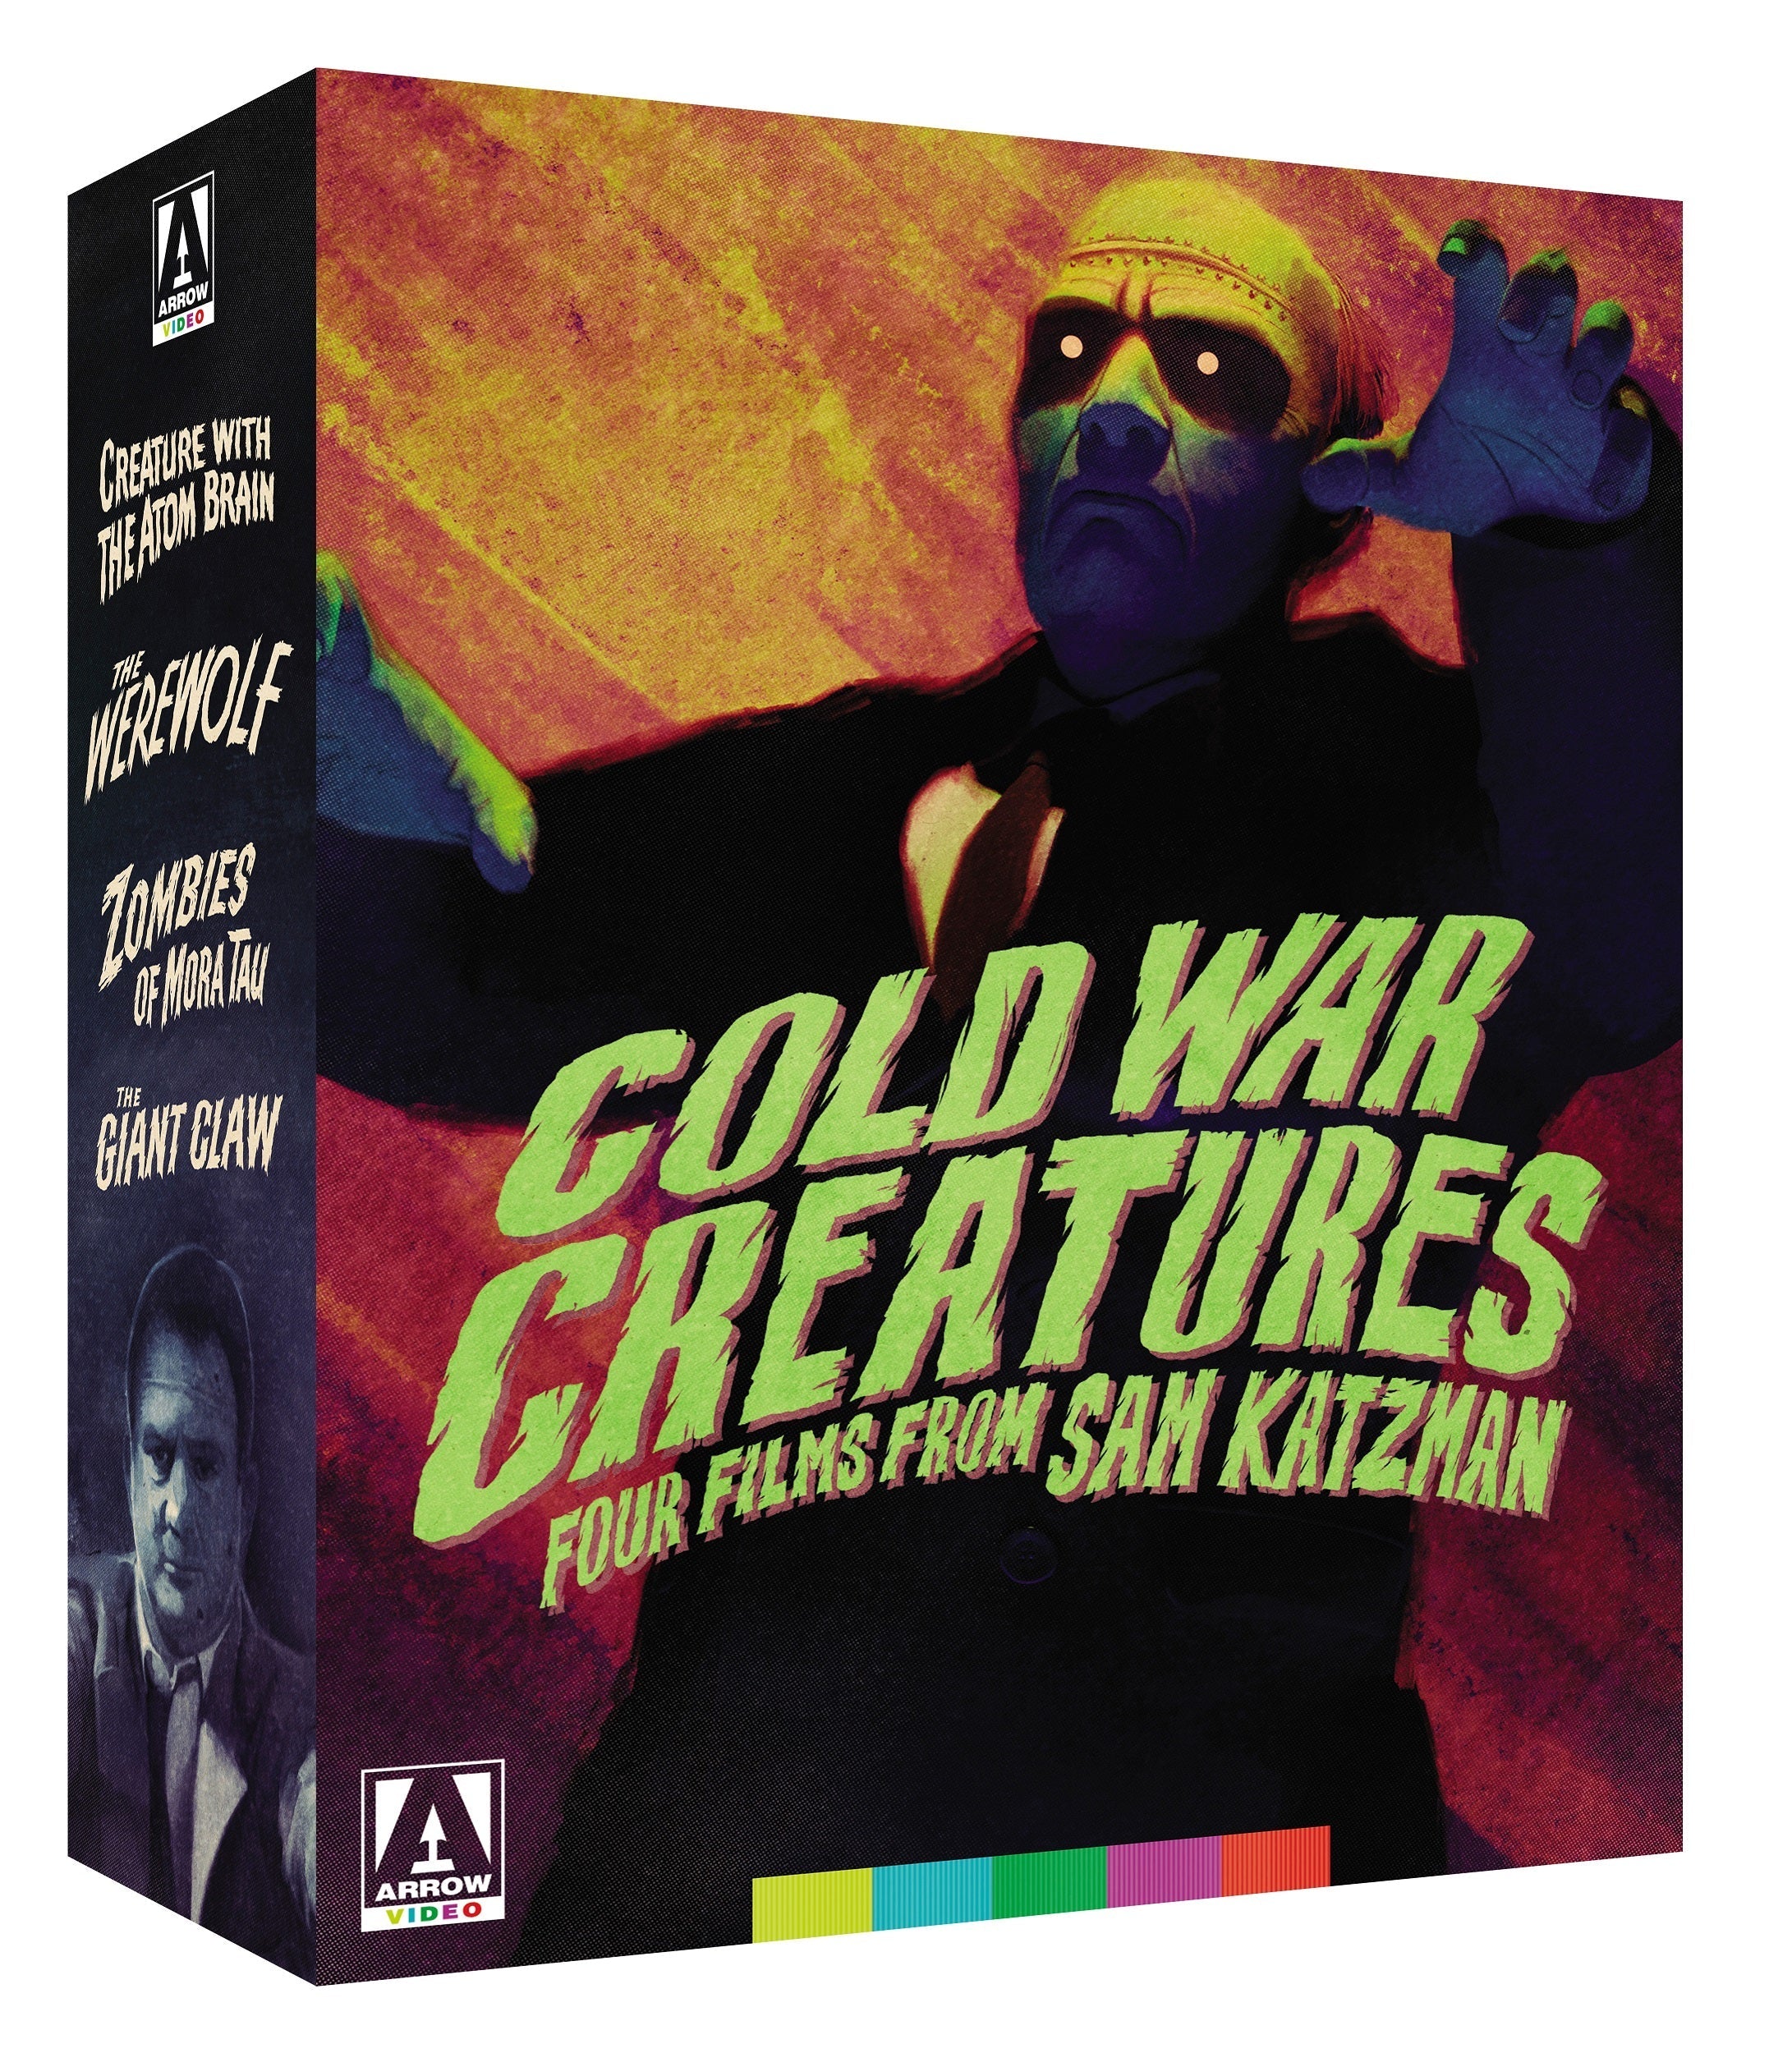 Cold War Creatures: Four Films From Sam Katzman (Limited Edition) Blu-Ray Blu-Ray